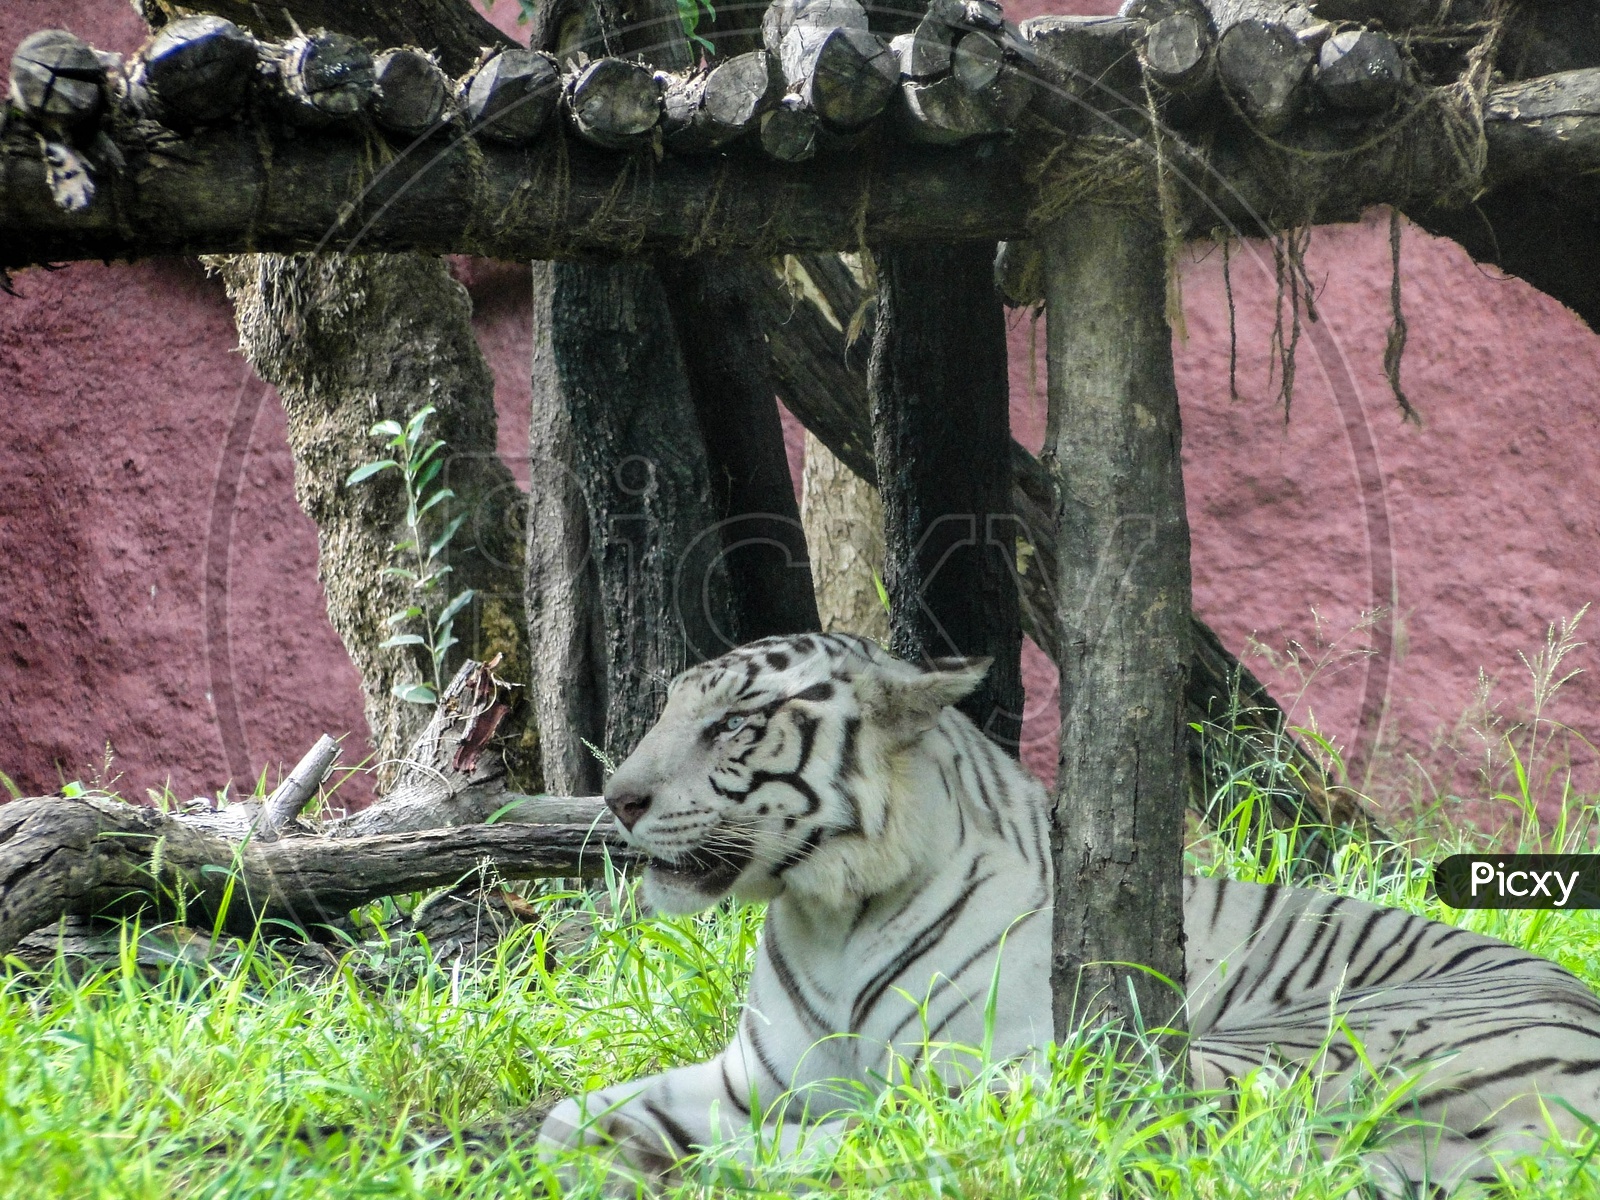 The white tiger or Bleached tiger.